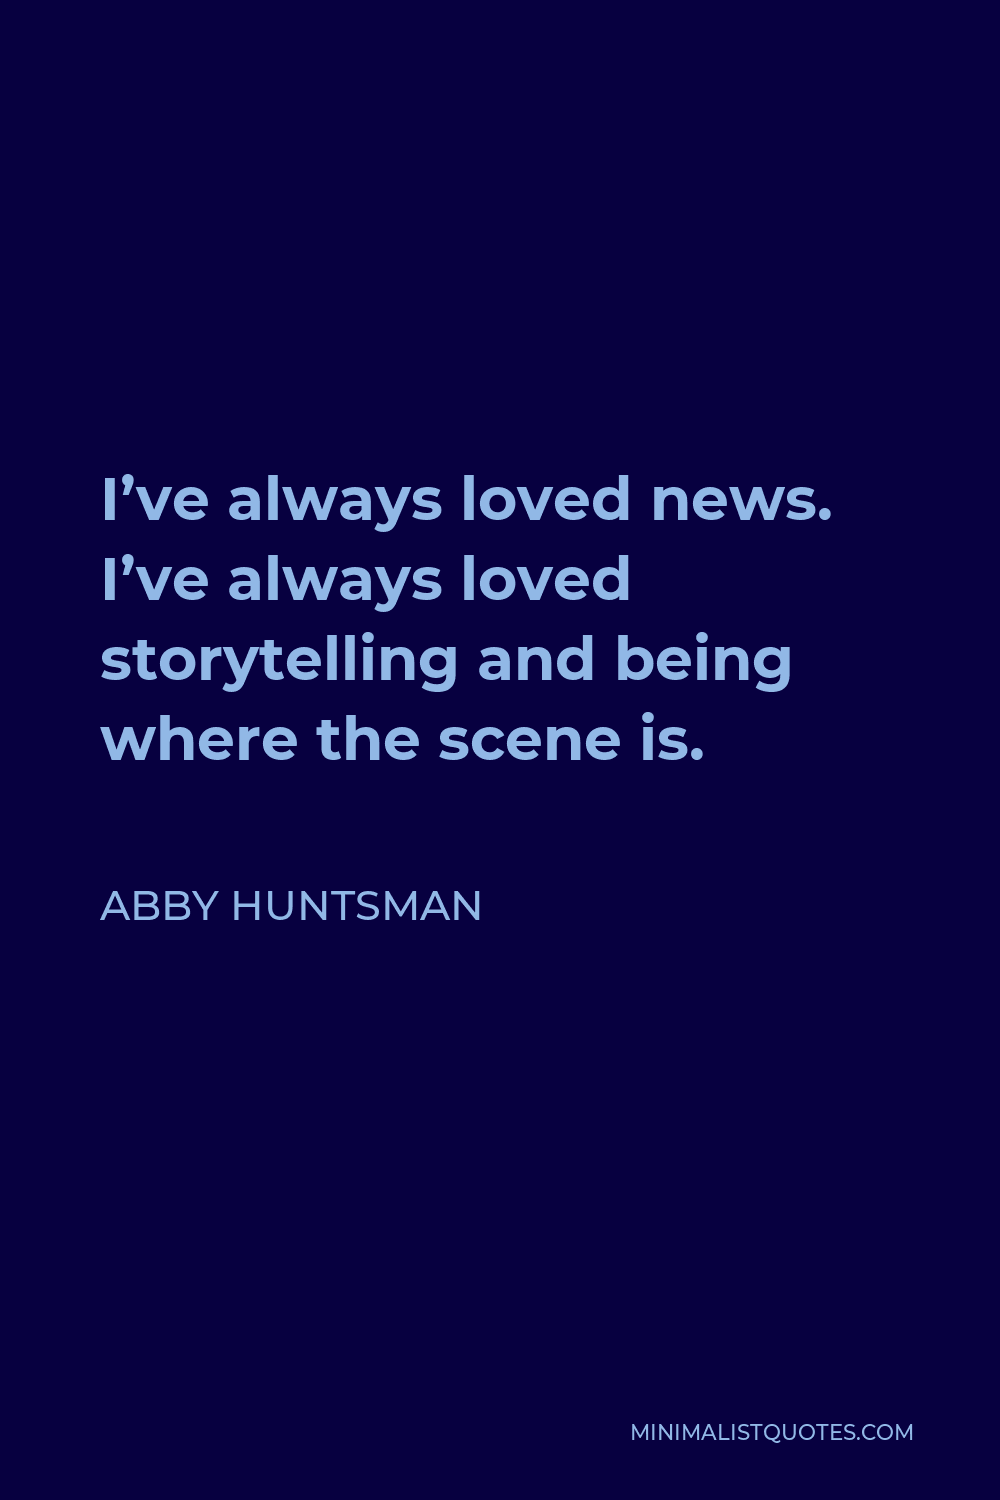 Abby Huntsman Quote - I’ve always loved news. I’ve always loved storytelling and being where the scene is.